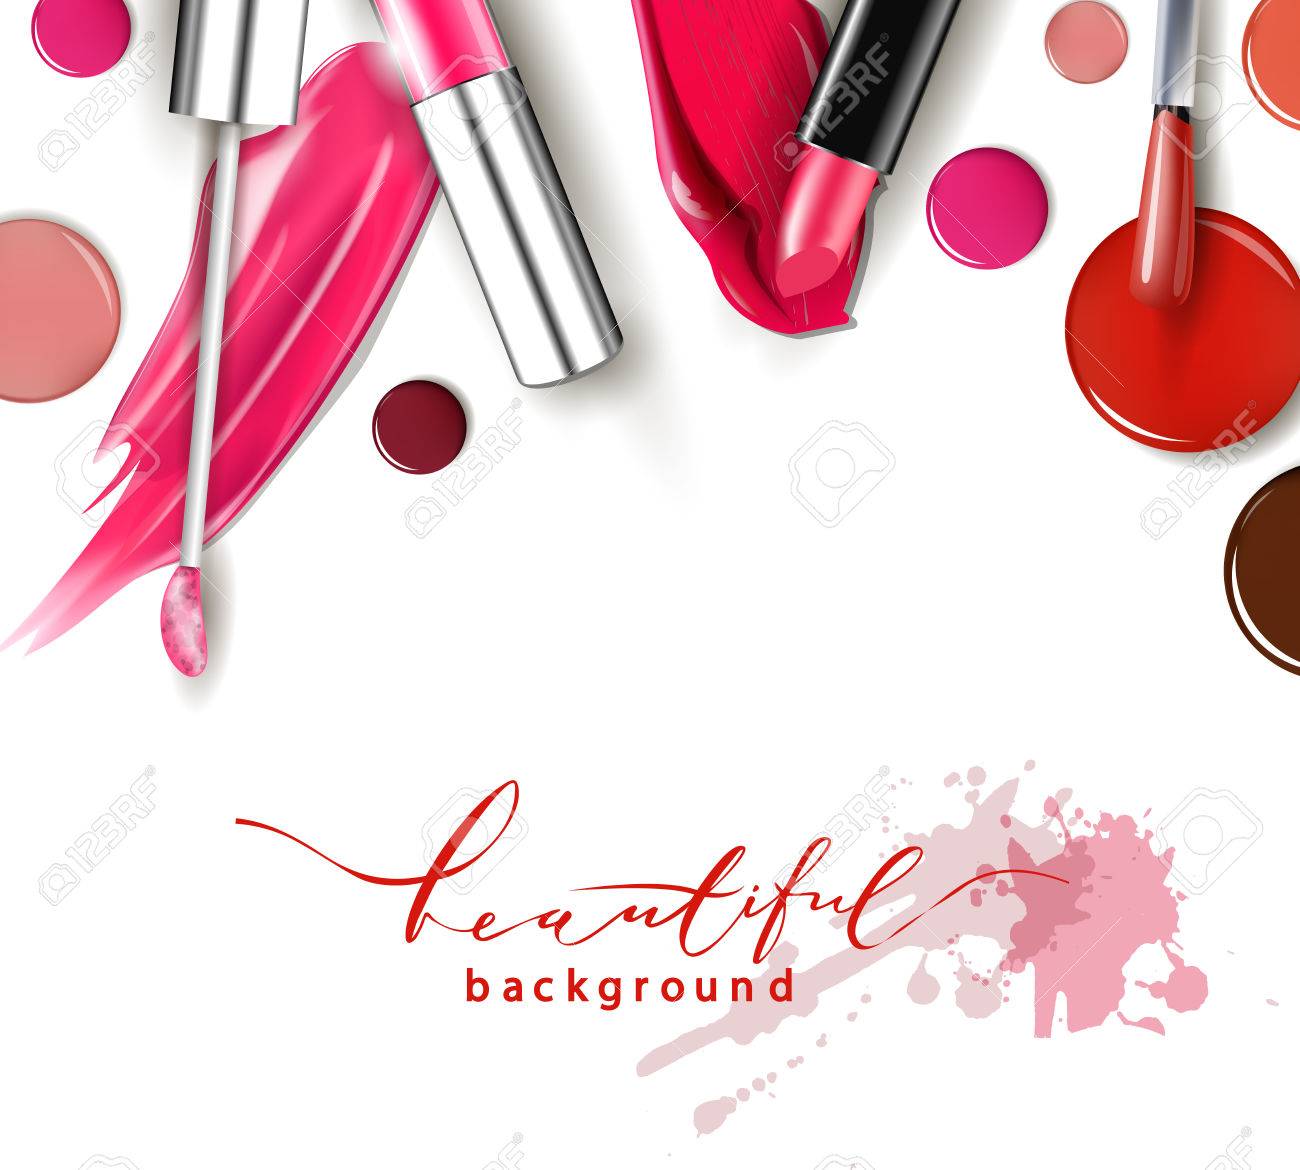 Cosmetics And Fashion Background With Make Up Artist Objects